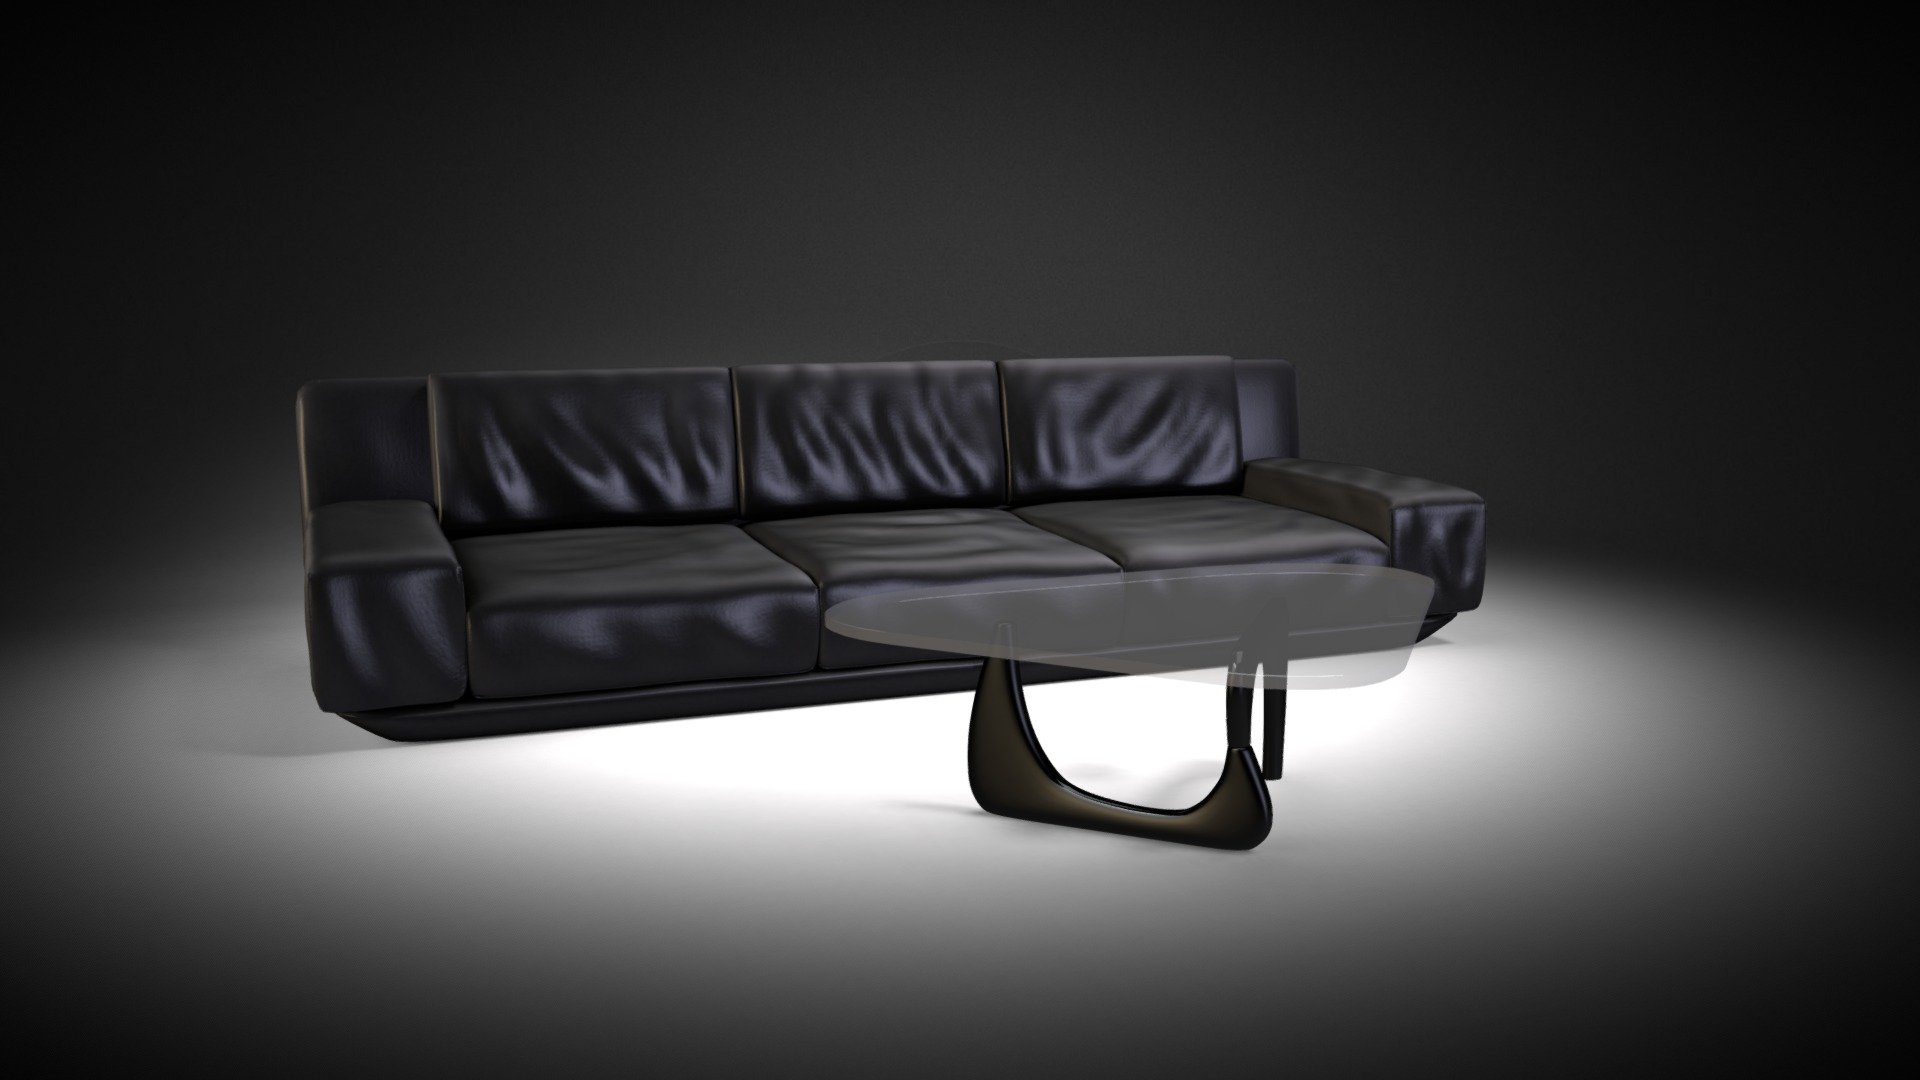 Modern furniture.
My first try at realtime modeling and texturing 3d model